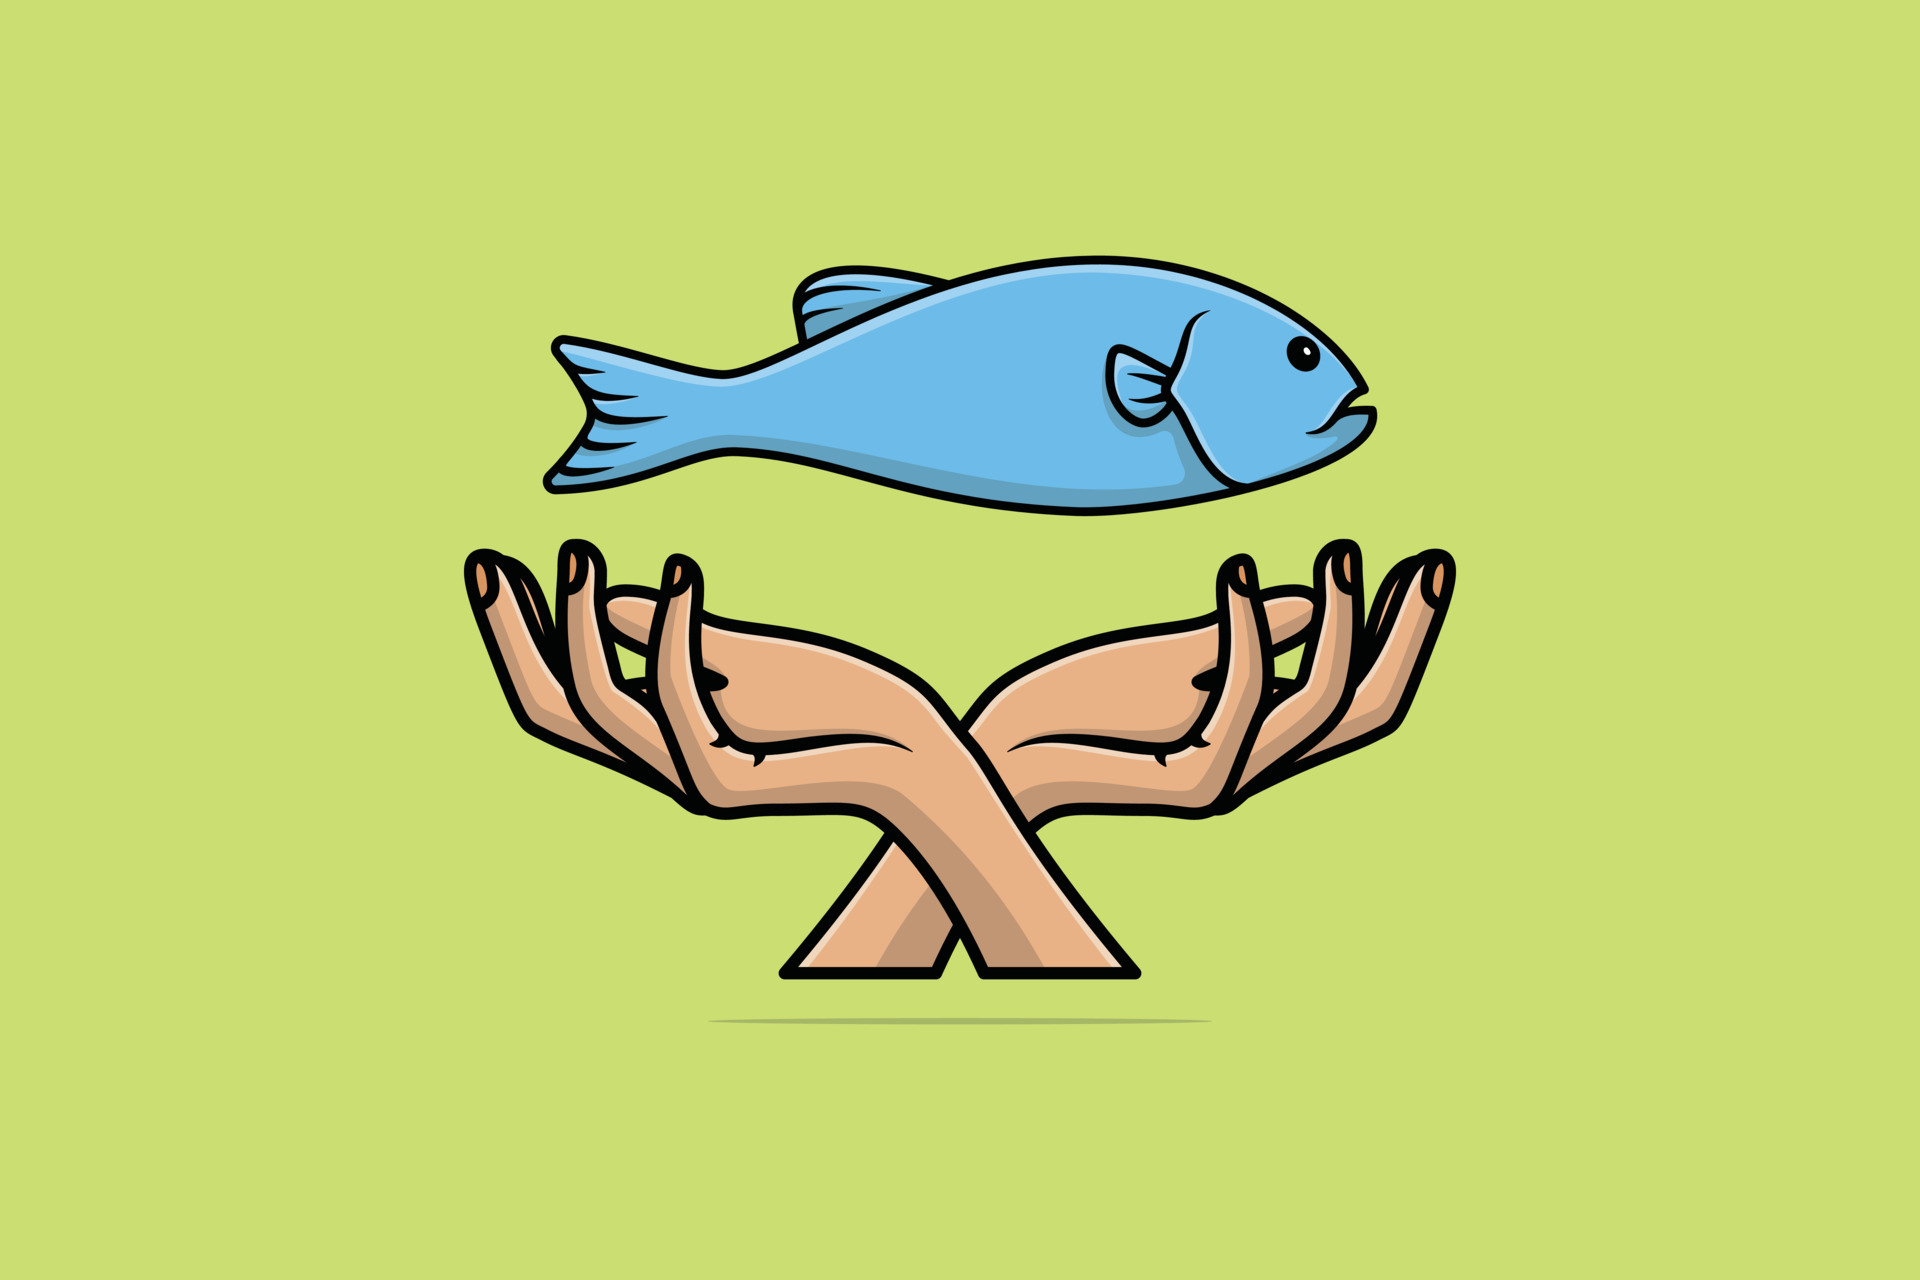 Cute Fish with Hands vector illustration. Animal nature icon